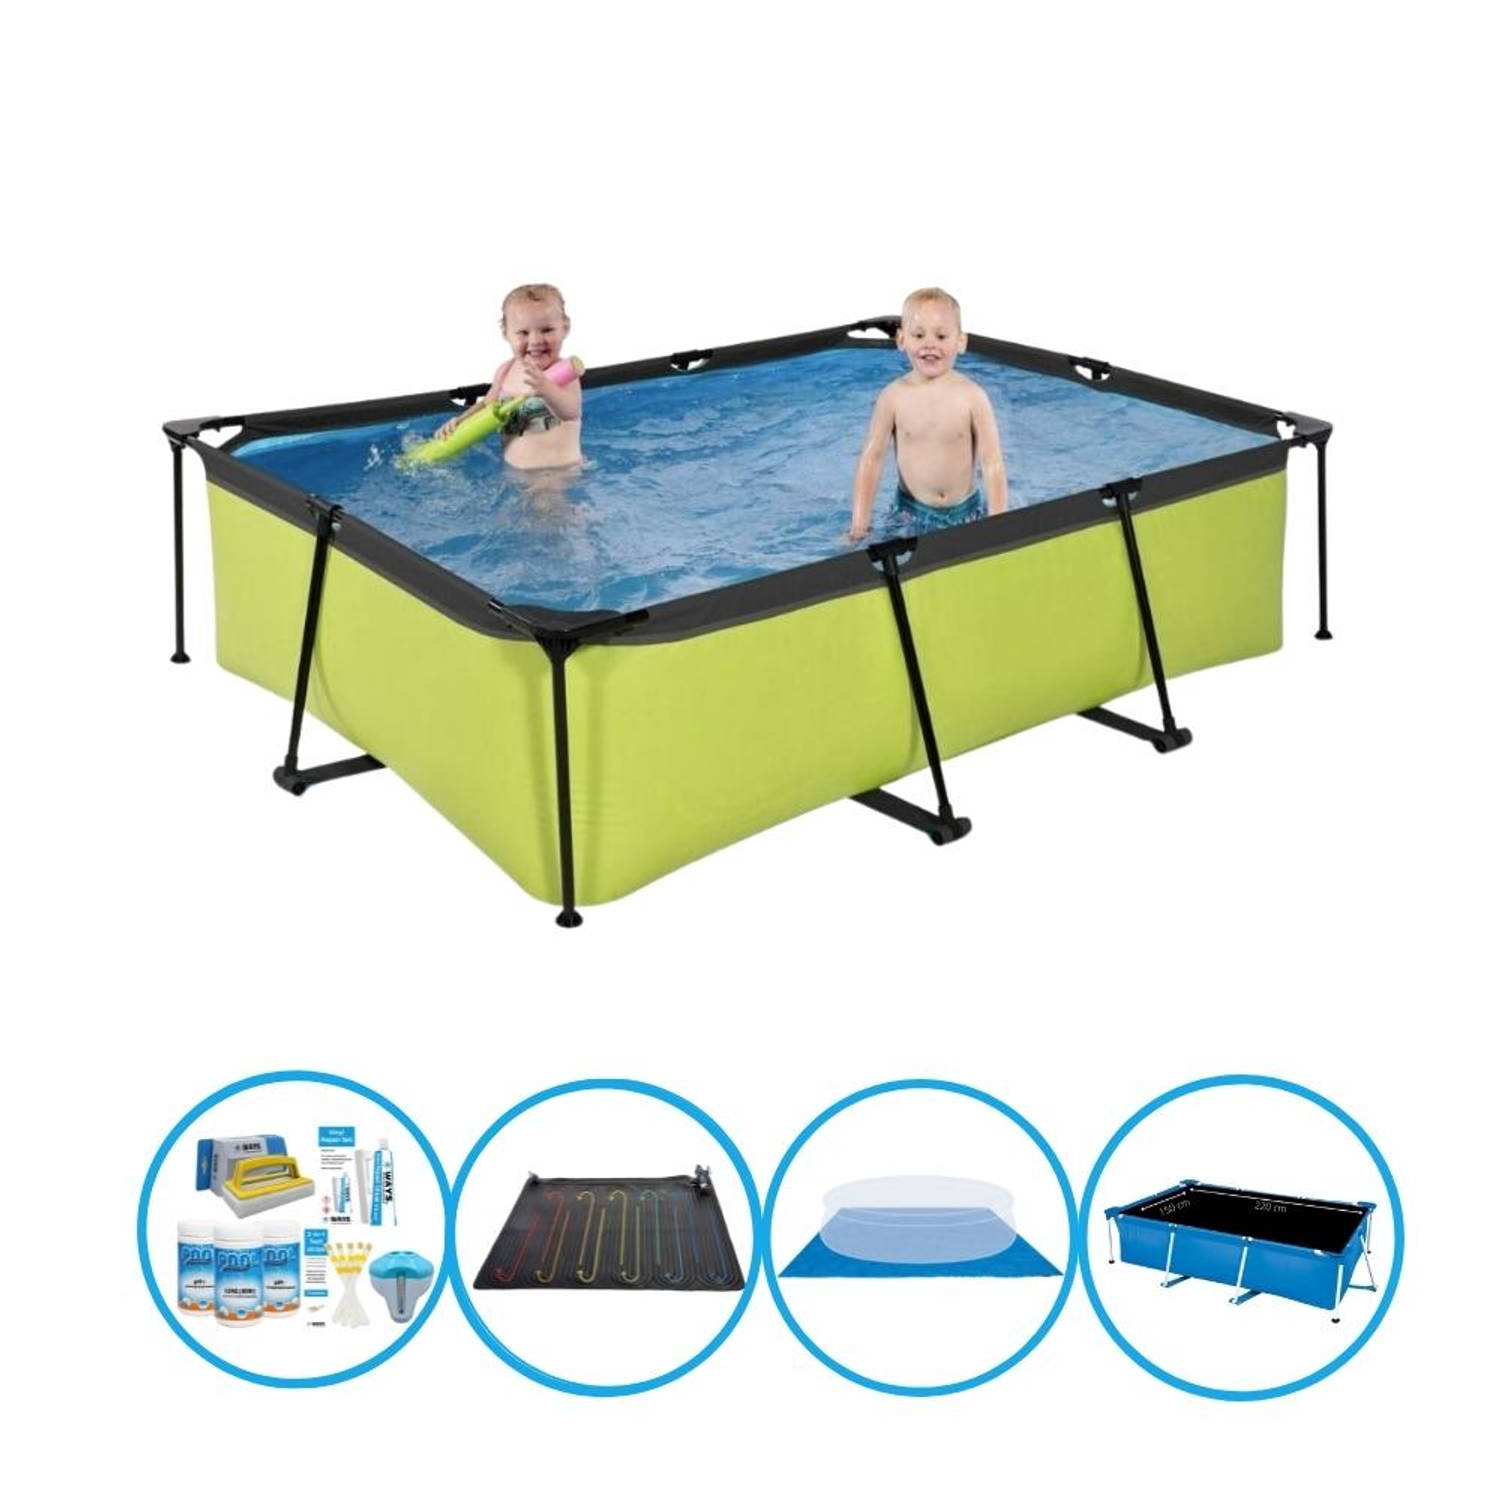 EXIT Zwembad Lime - Frame Pool 220x150x60 cm - Combi Deal